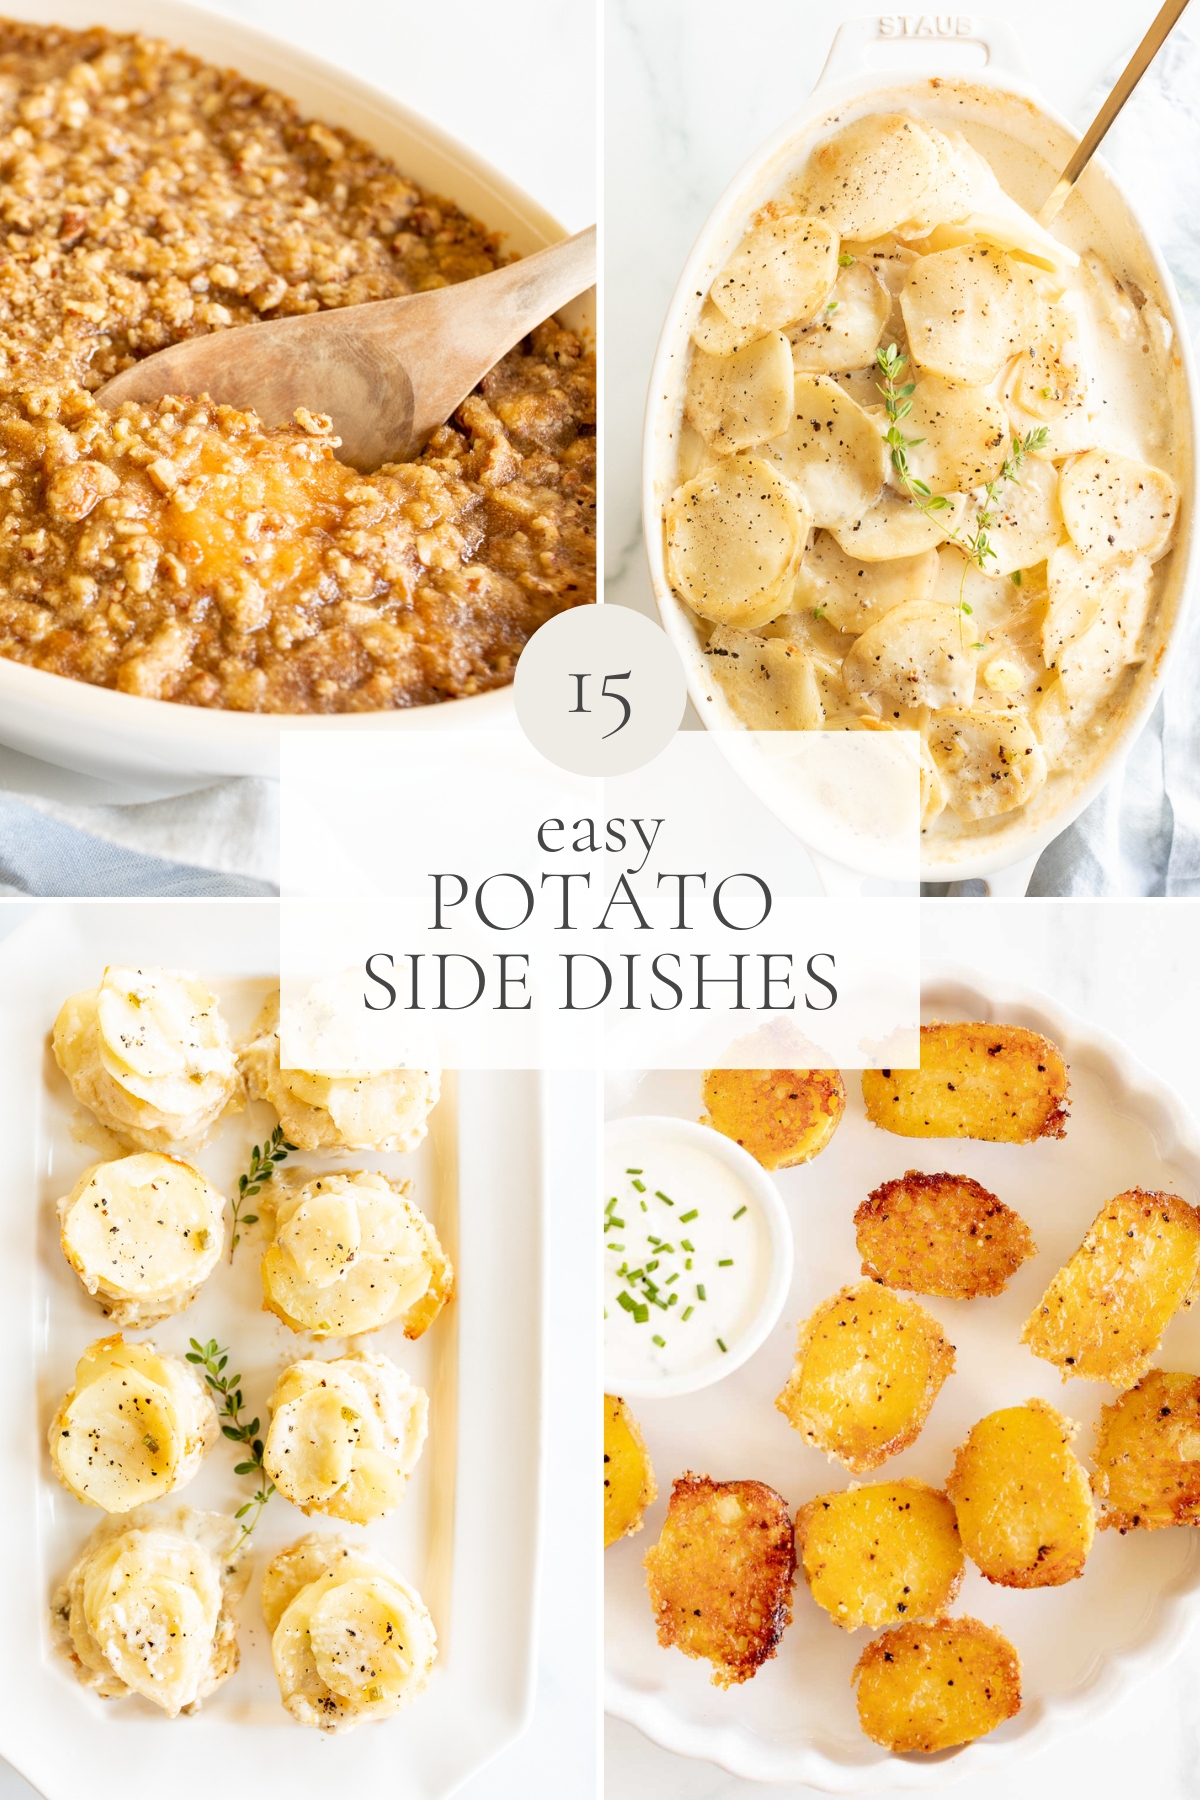 15 easy potato side dishes.